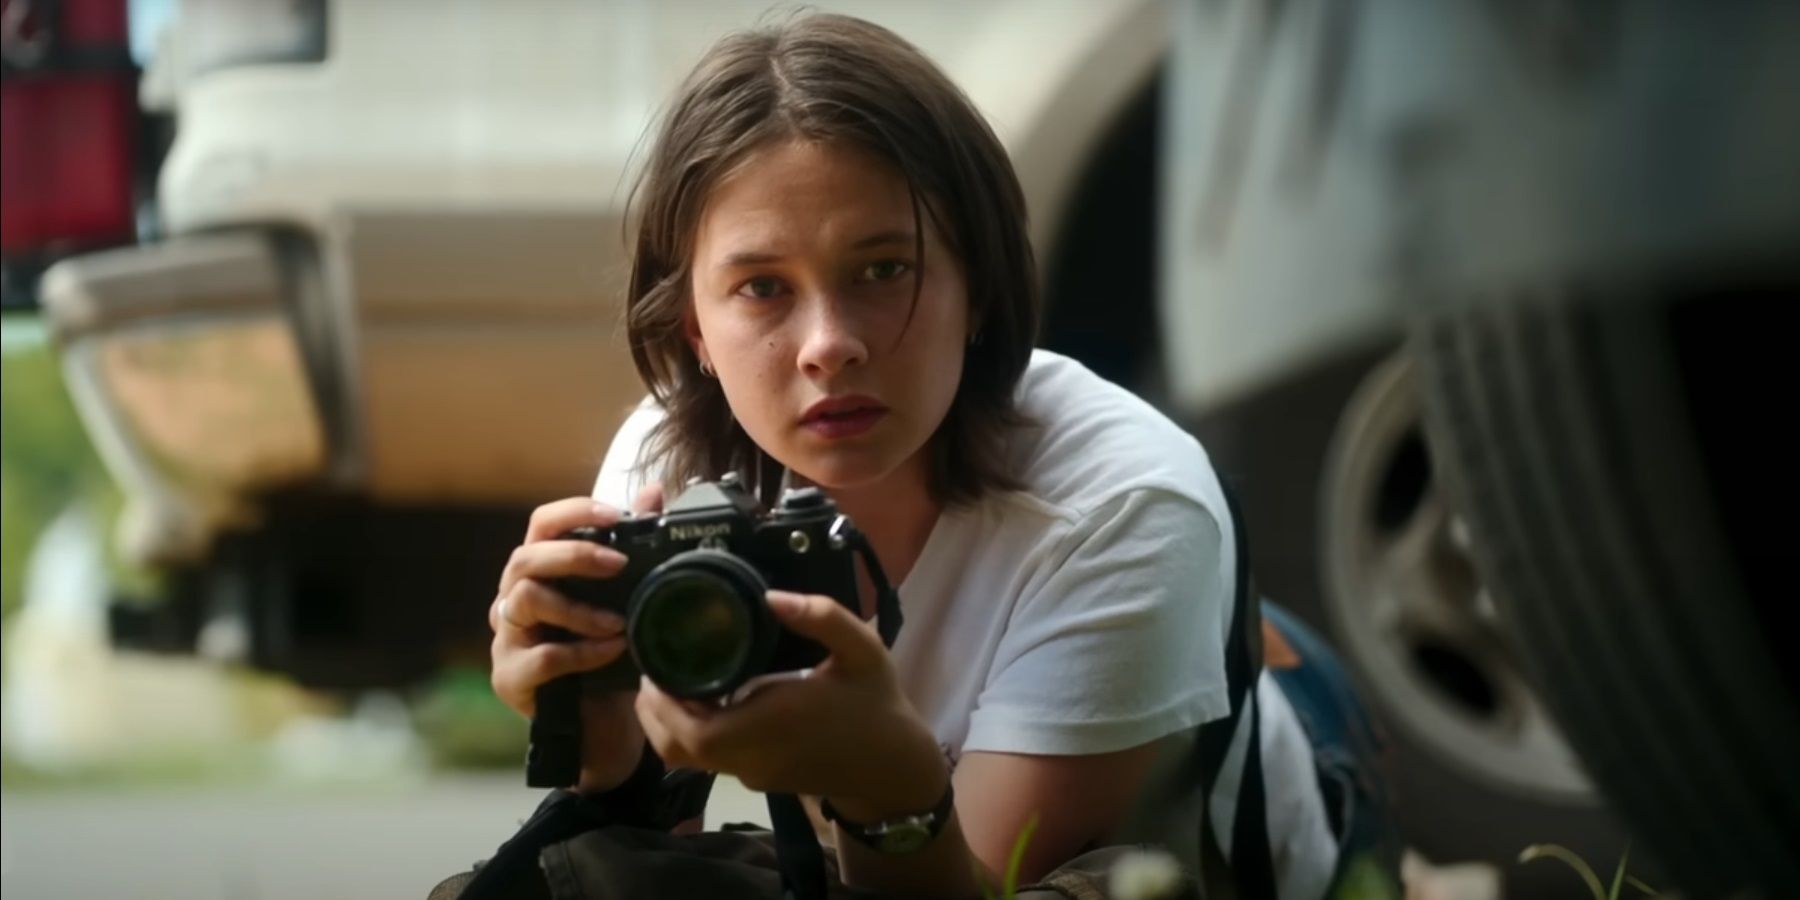 Cailee Spaeny as Jessie in Civil War. She is holding a camera.